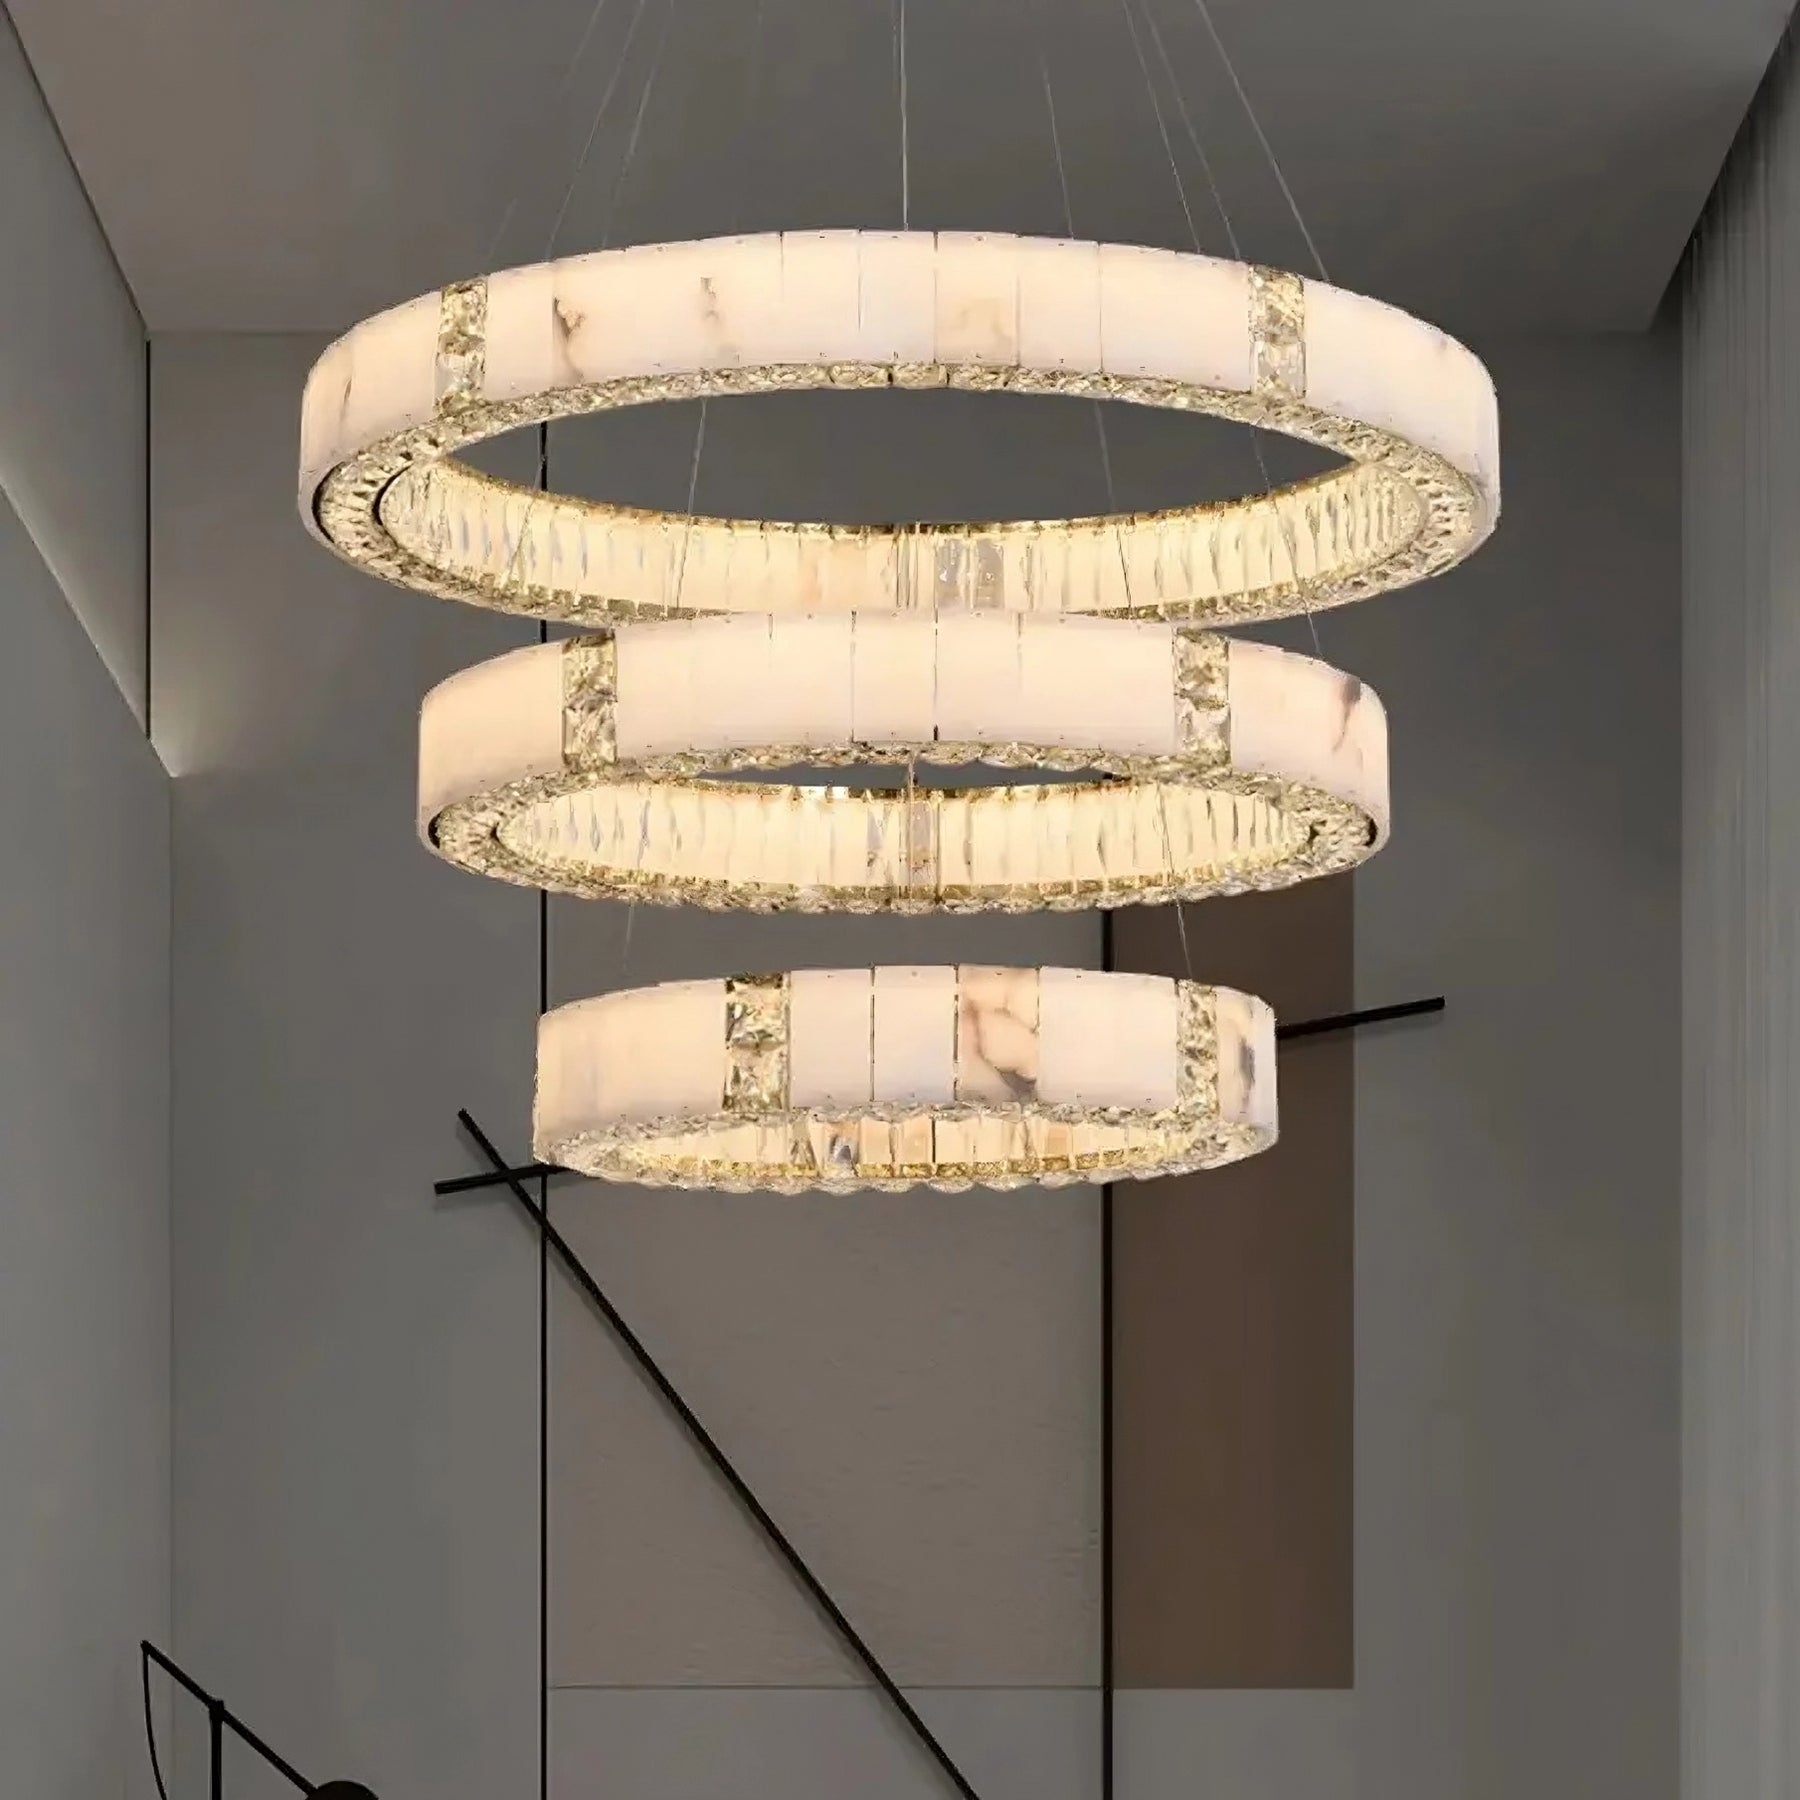 A Morsale.com Marble & Crystal Modern Chandelier featuring three large, illuminated circular rings suspended at descending heights. The rings are adorned with a natural marble-like finish interspersed with textured, translucent segments, casting a soft, ambient glow in an elegant room.